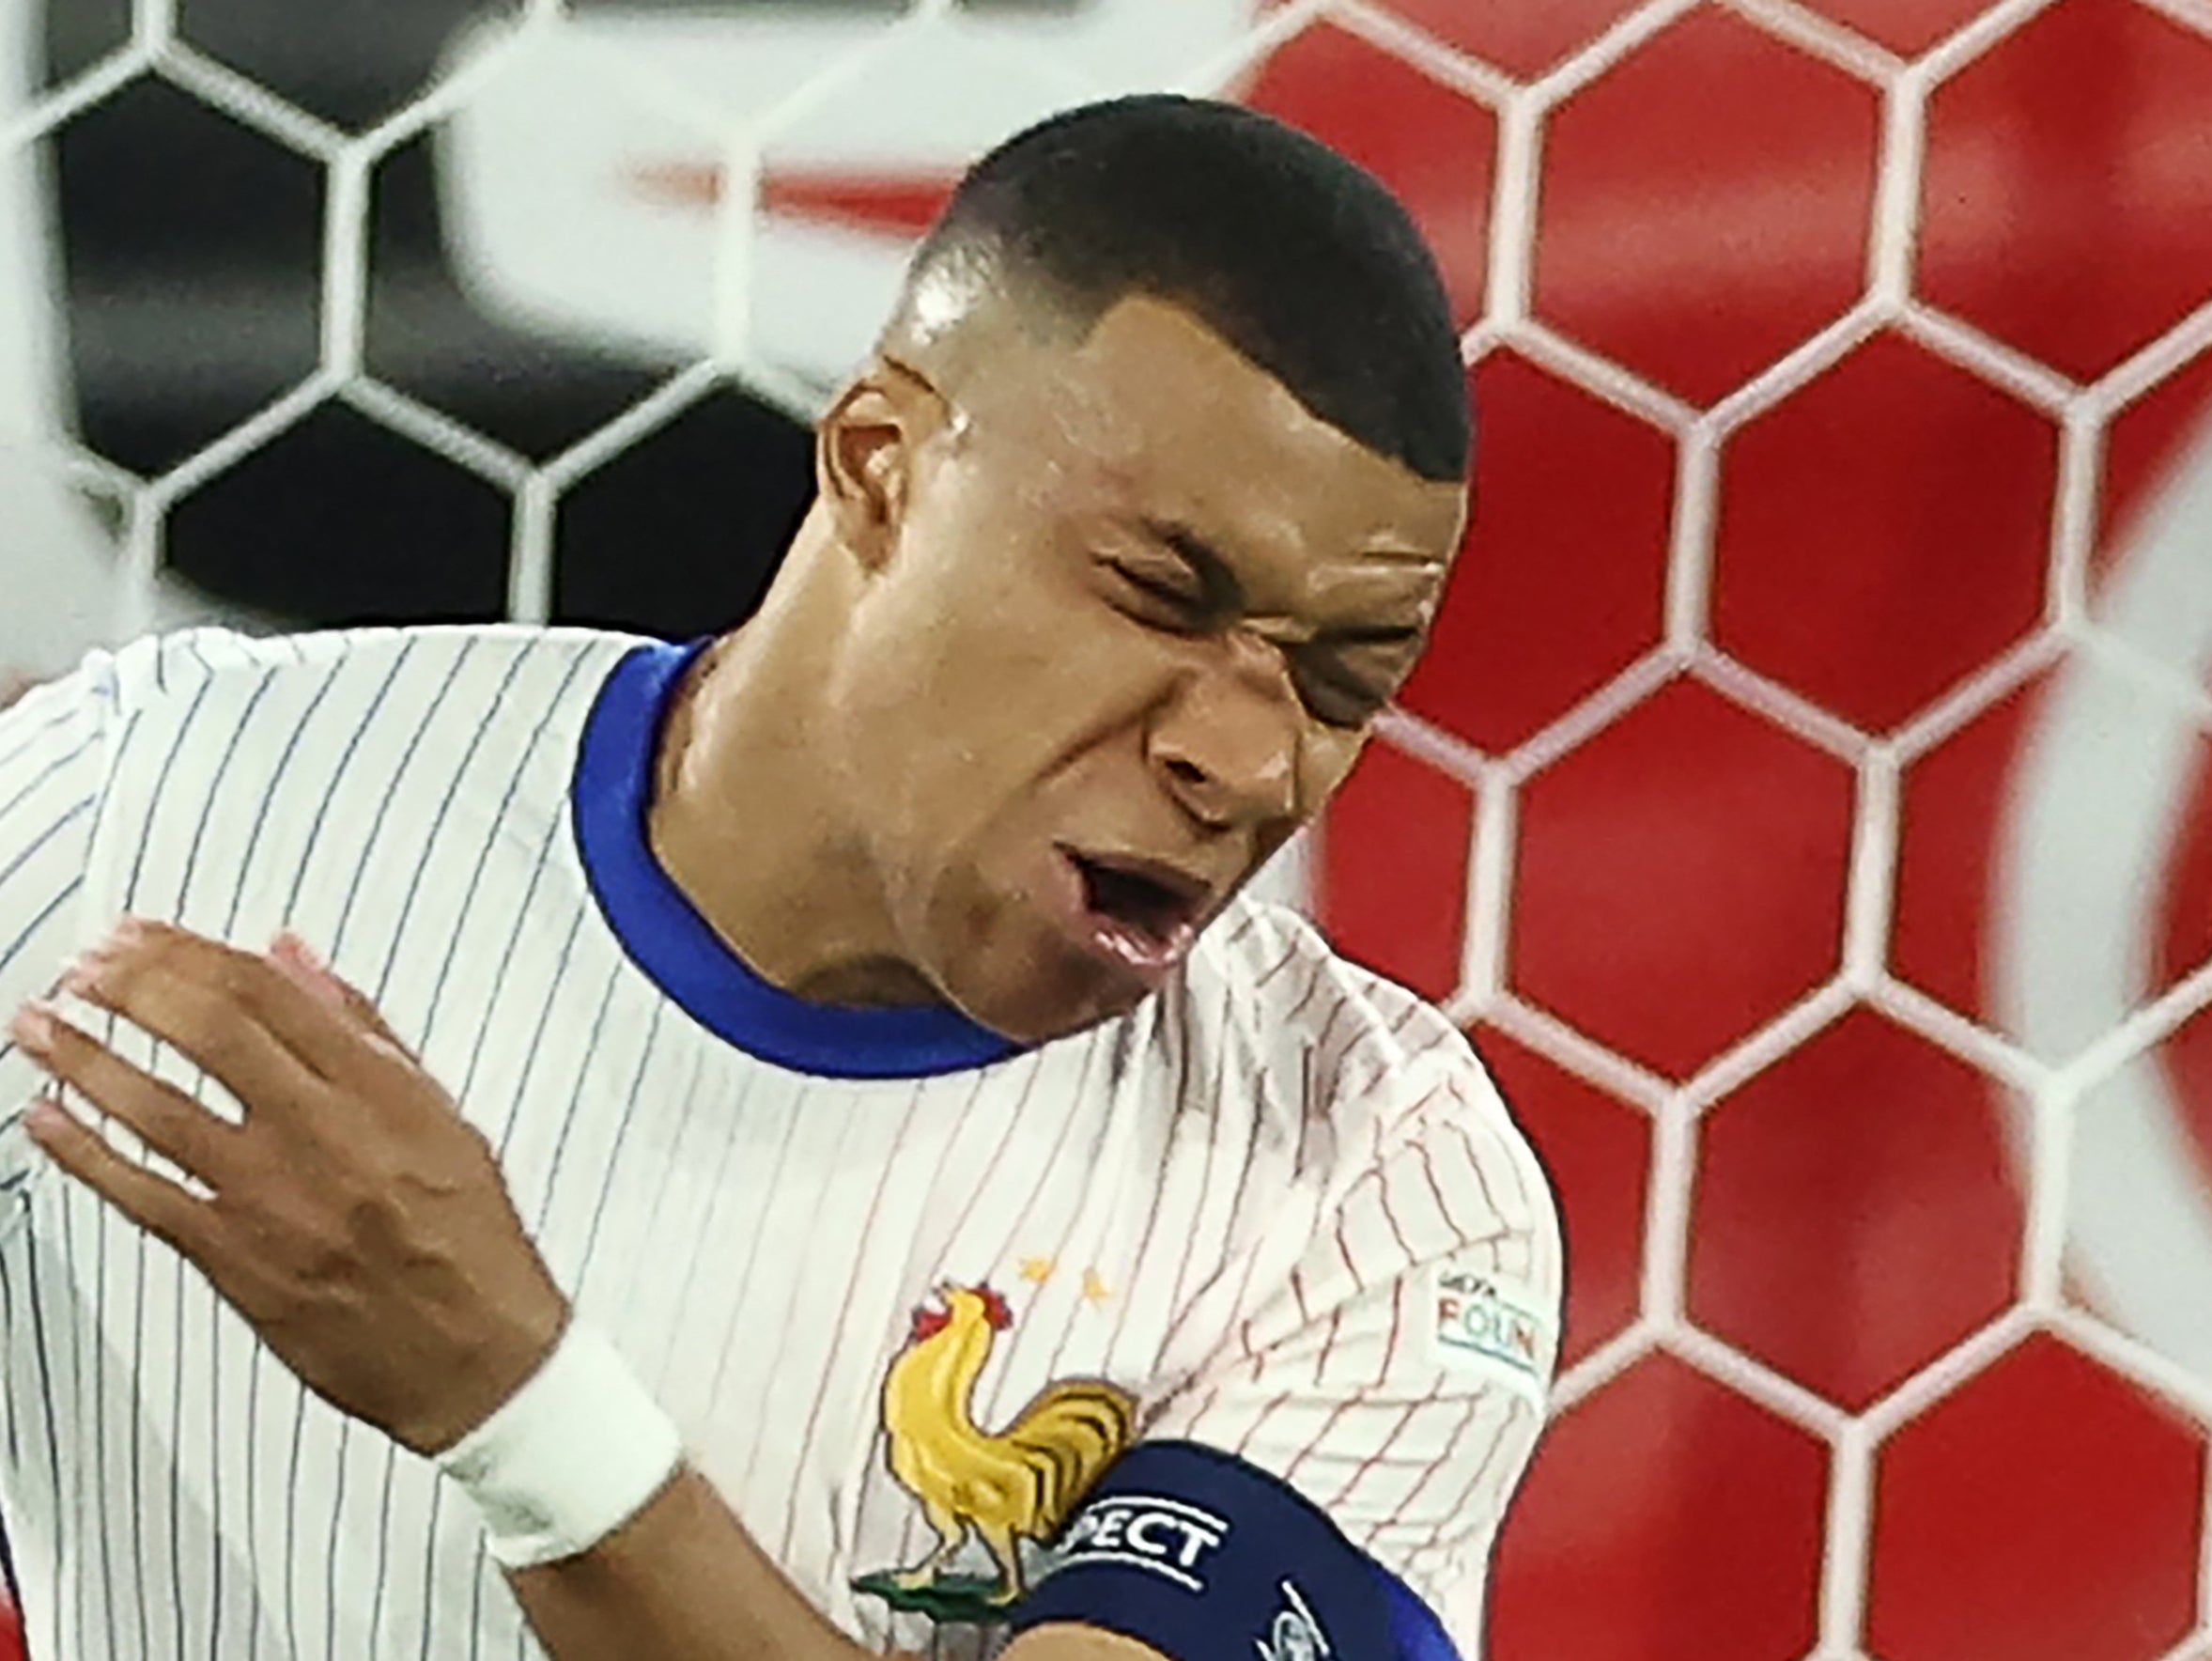 france football, kylian mbappe, euro 2024, didier deschamps, france provide kylian mbappe injury update after suffering broken nose at euro 2024